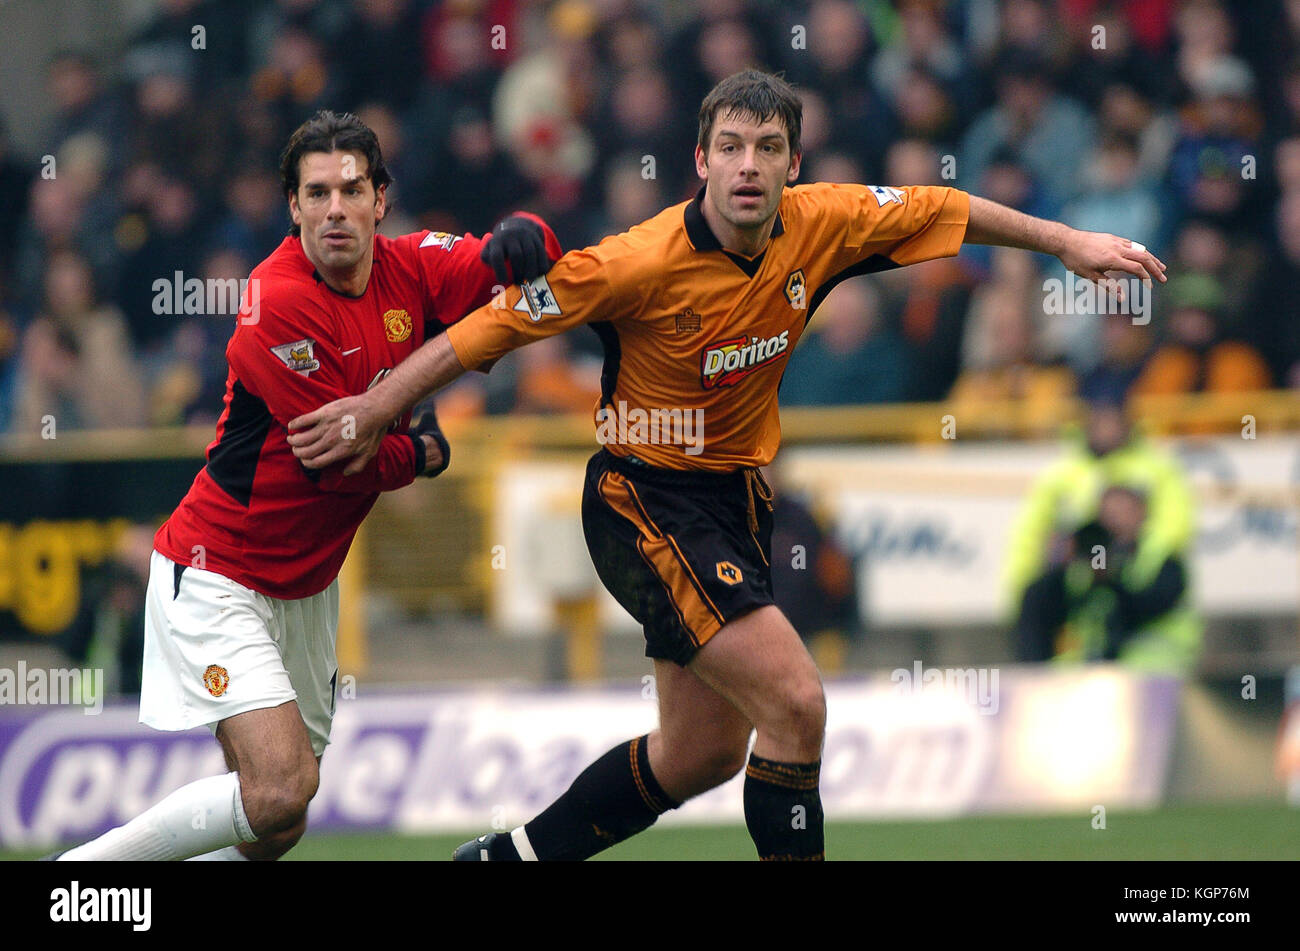 Footballer Ruud Van Nistelrooy and Paul Butler Wolverhampton Wanderers v Manchester United 17 January 2004 Stock Photo